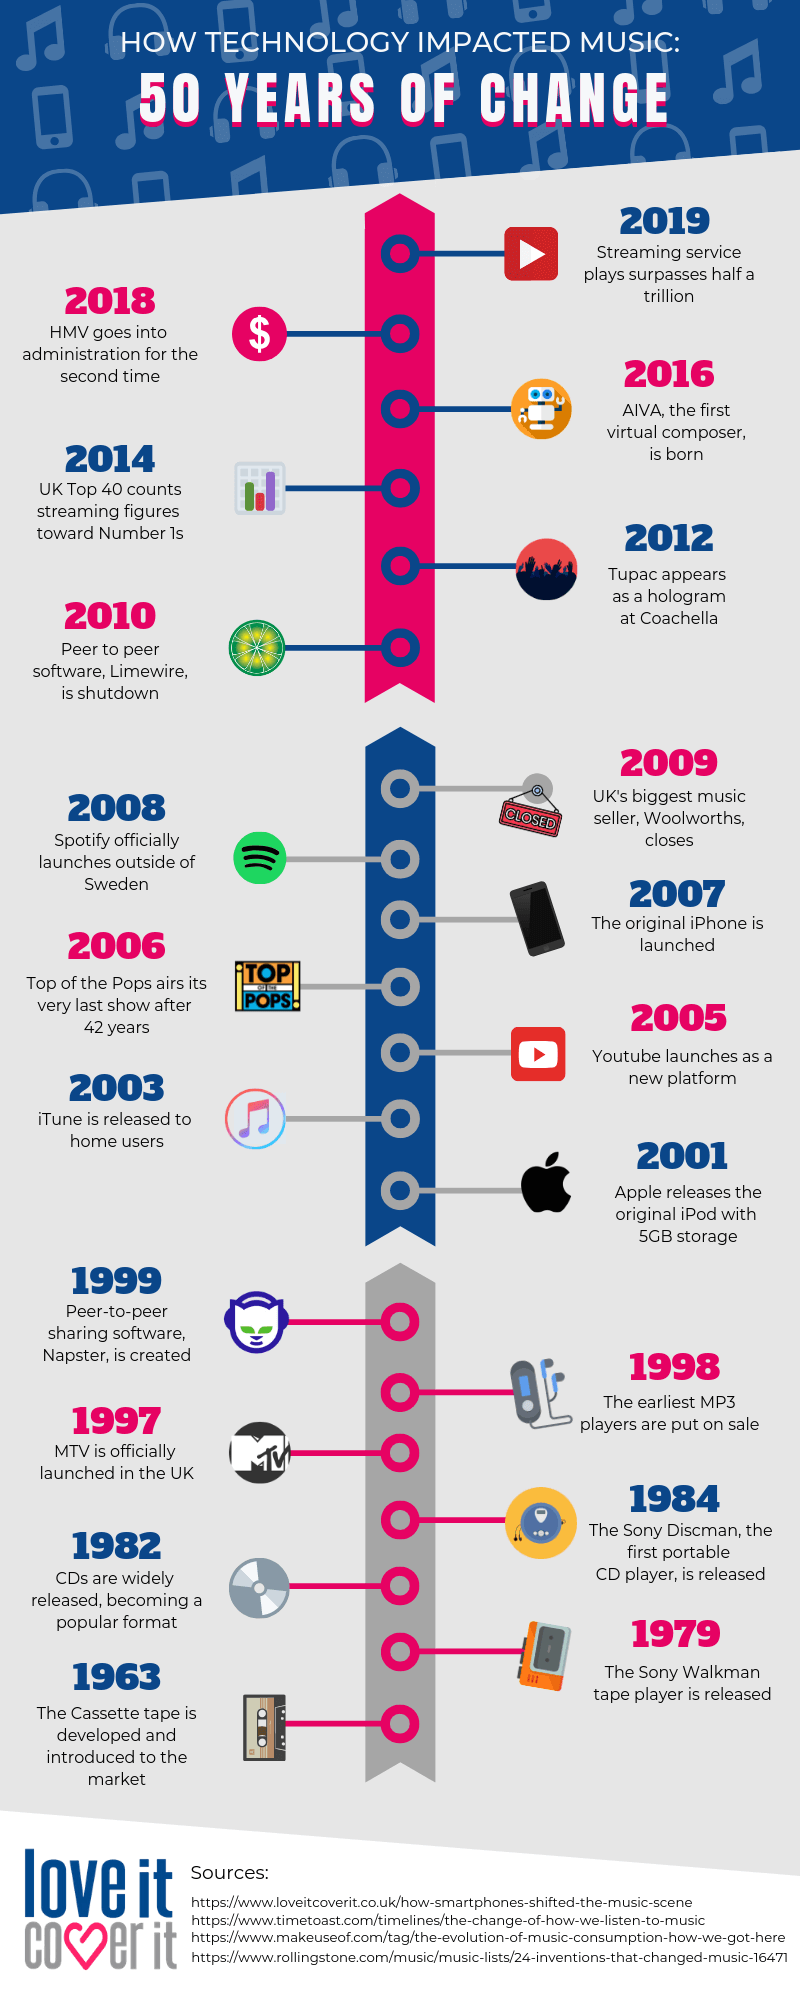 when streaming services first made their mark on the music industry